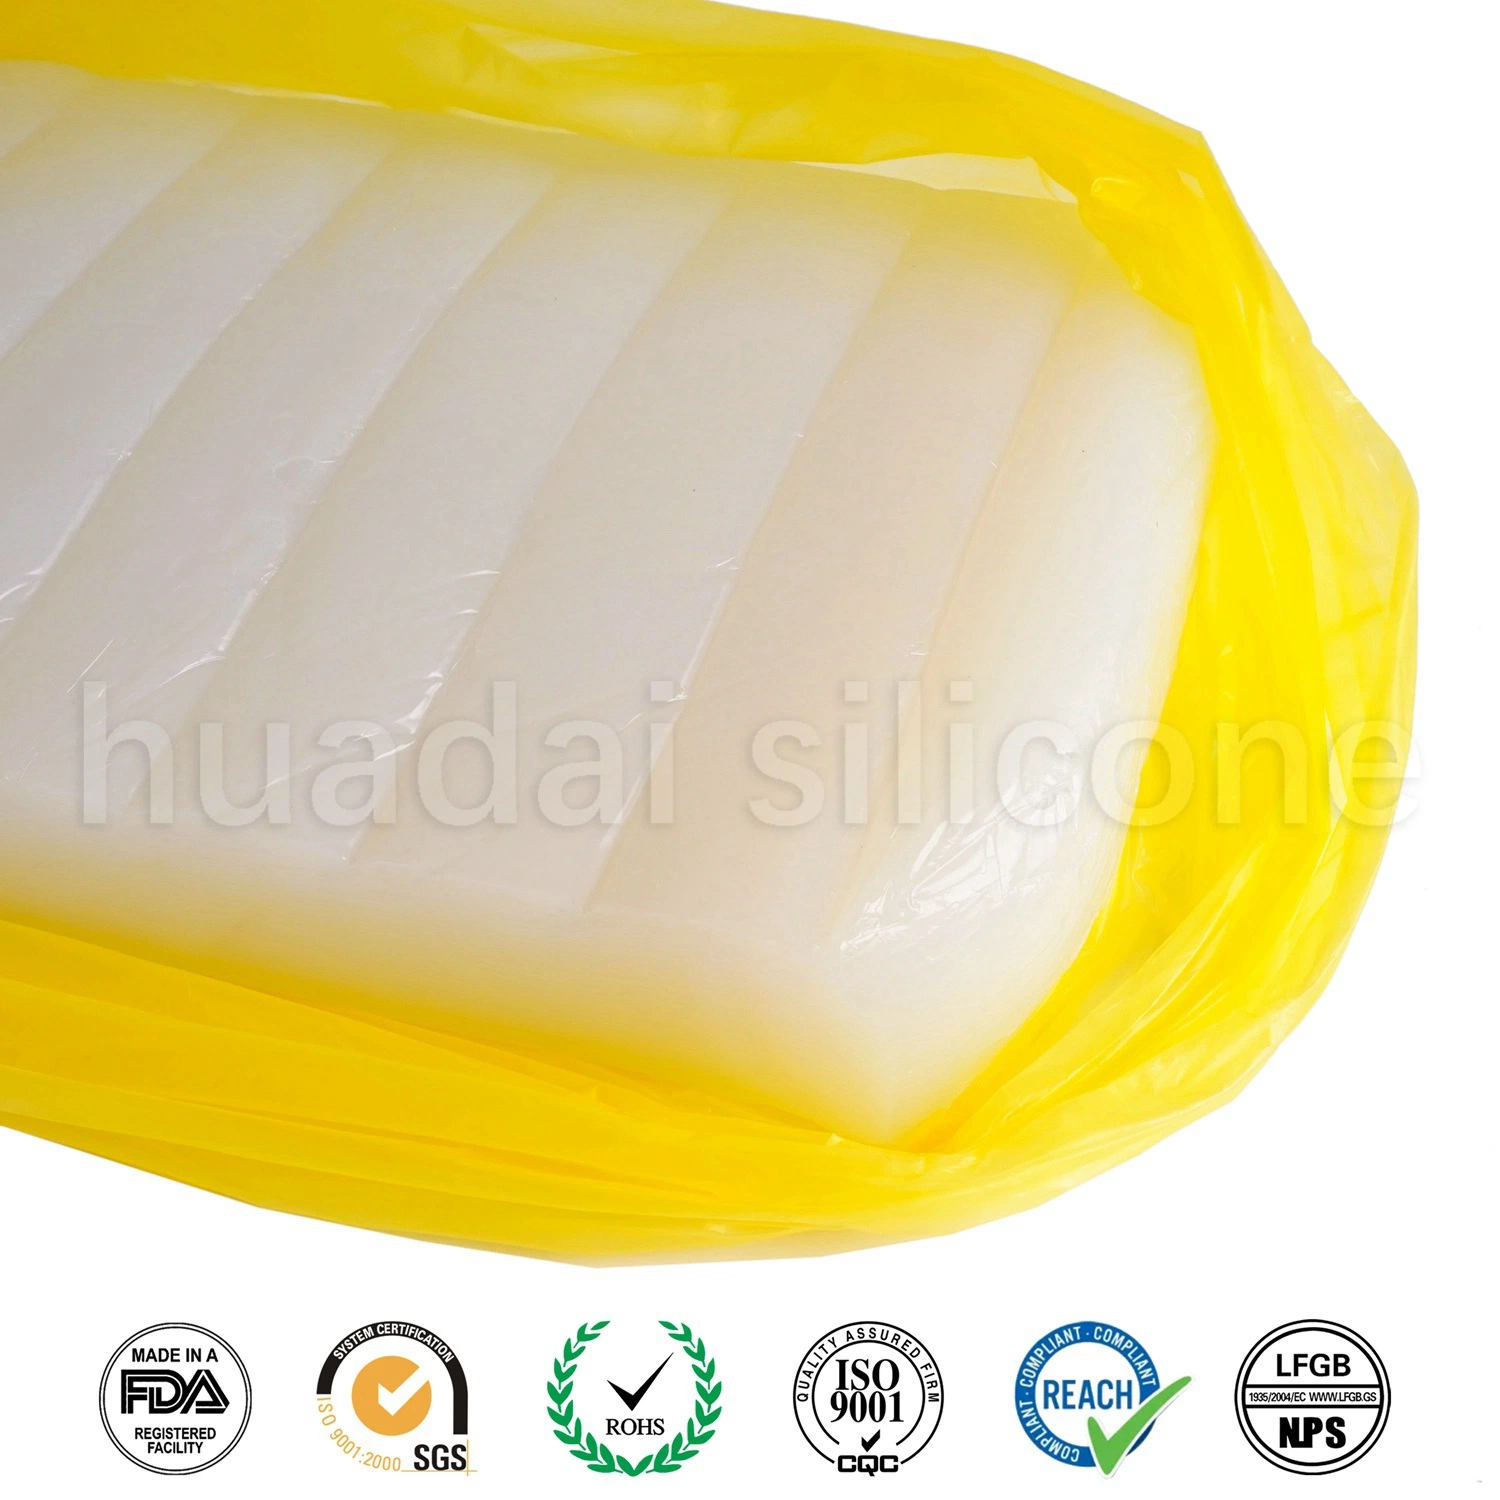 Htv Solid Silicone Rubber Material for Extrude Electric Wire, Auto Parts Heat Resistant Silicone Materials Factory